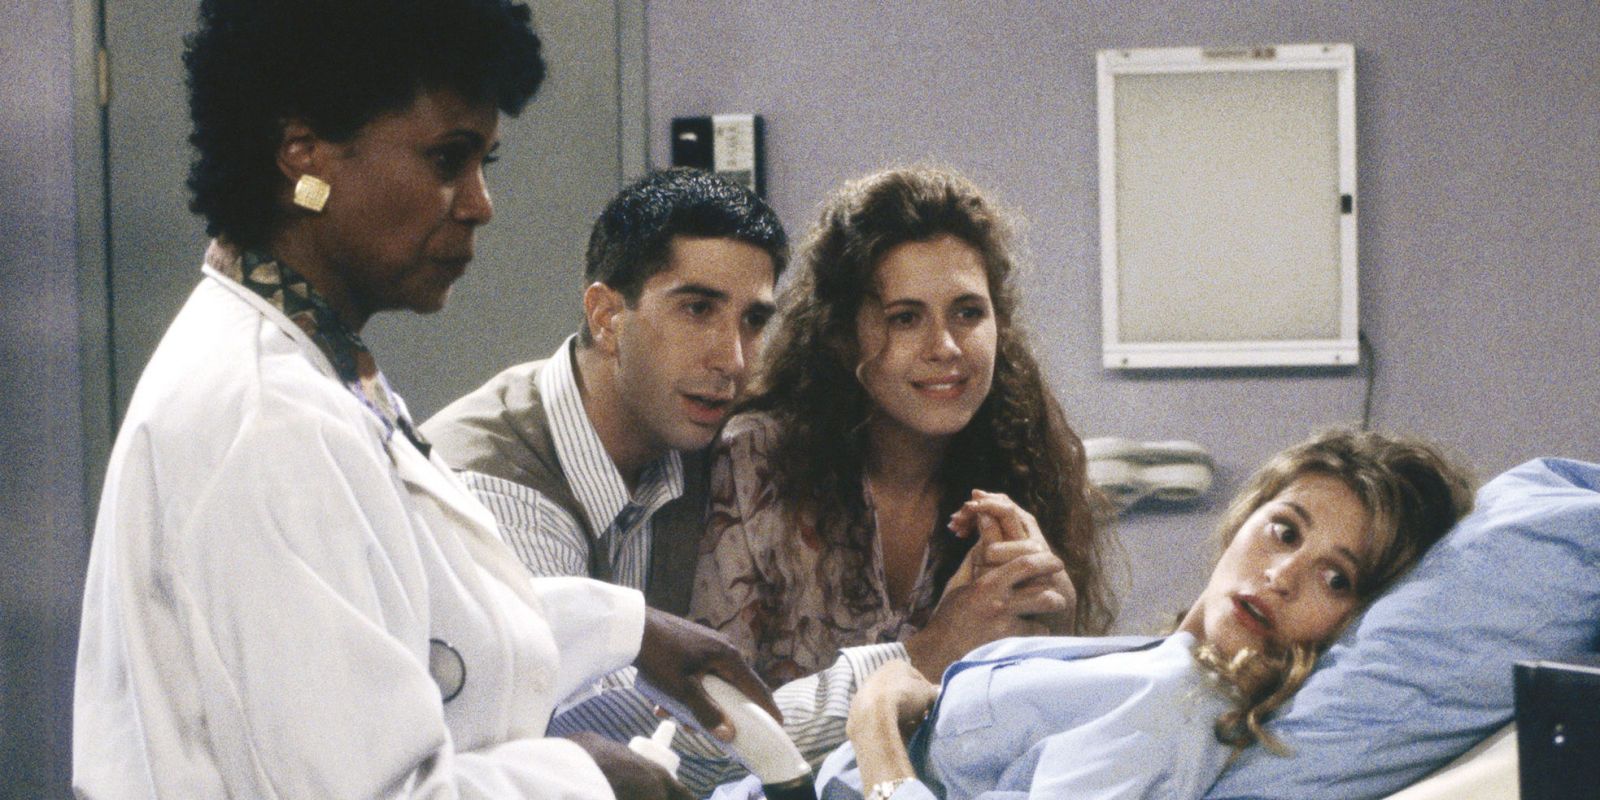 Jane Sibbett as Carol giving birth surrounded by Jessica Hecht as Susan, David Schwimmer as Ross, and a doctor in Friends